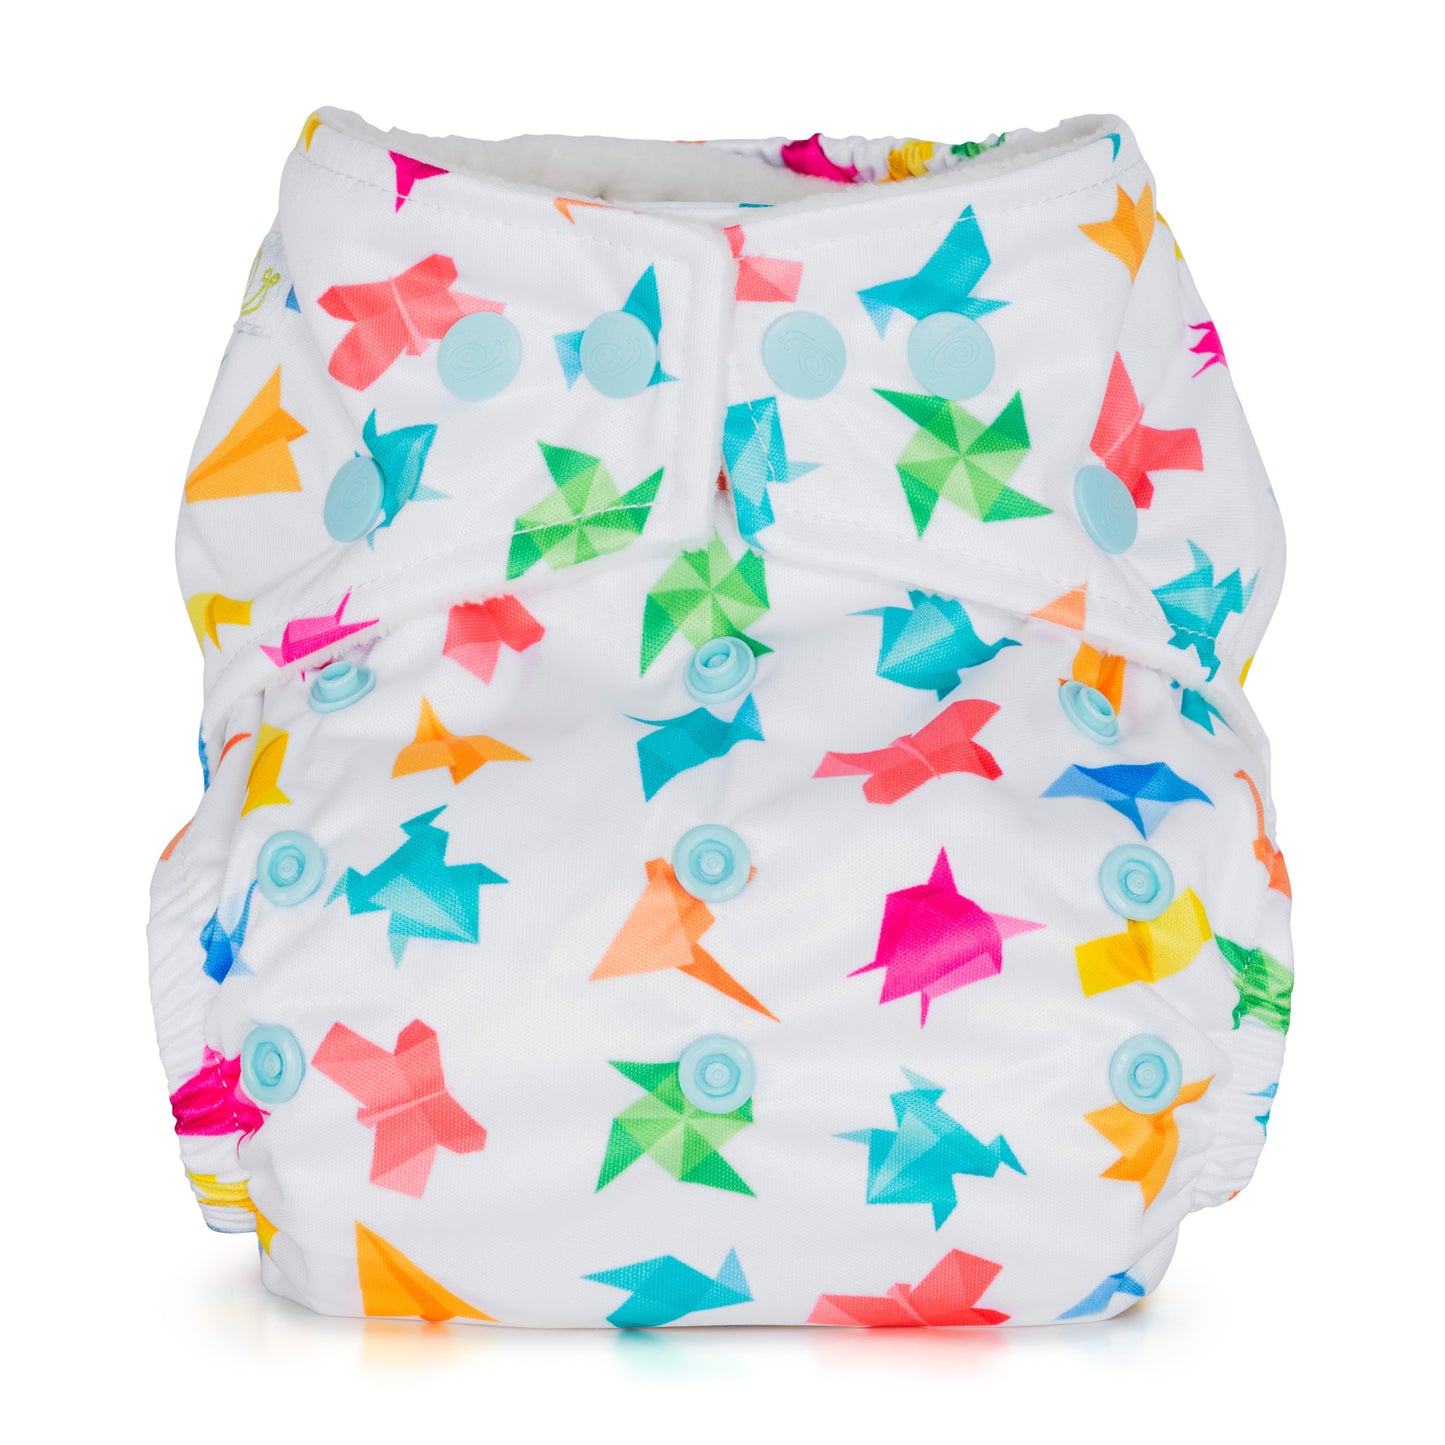 White Rainbow Baba+Boo One Size Origami Reusable Cloth Nappy